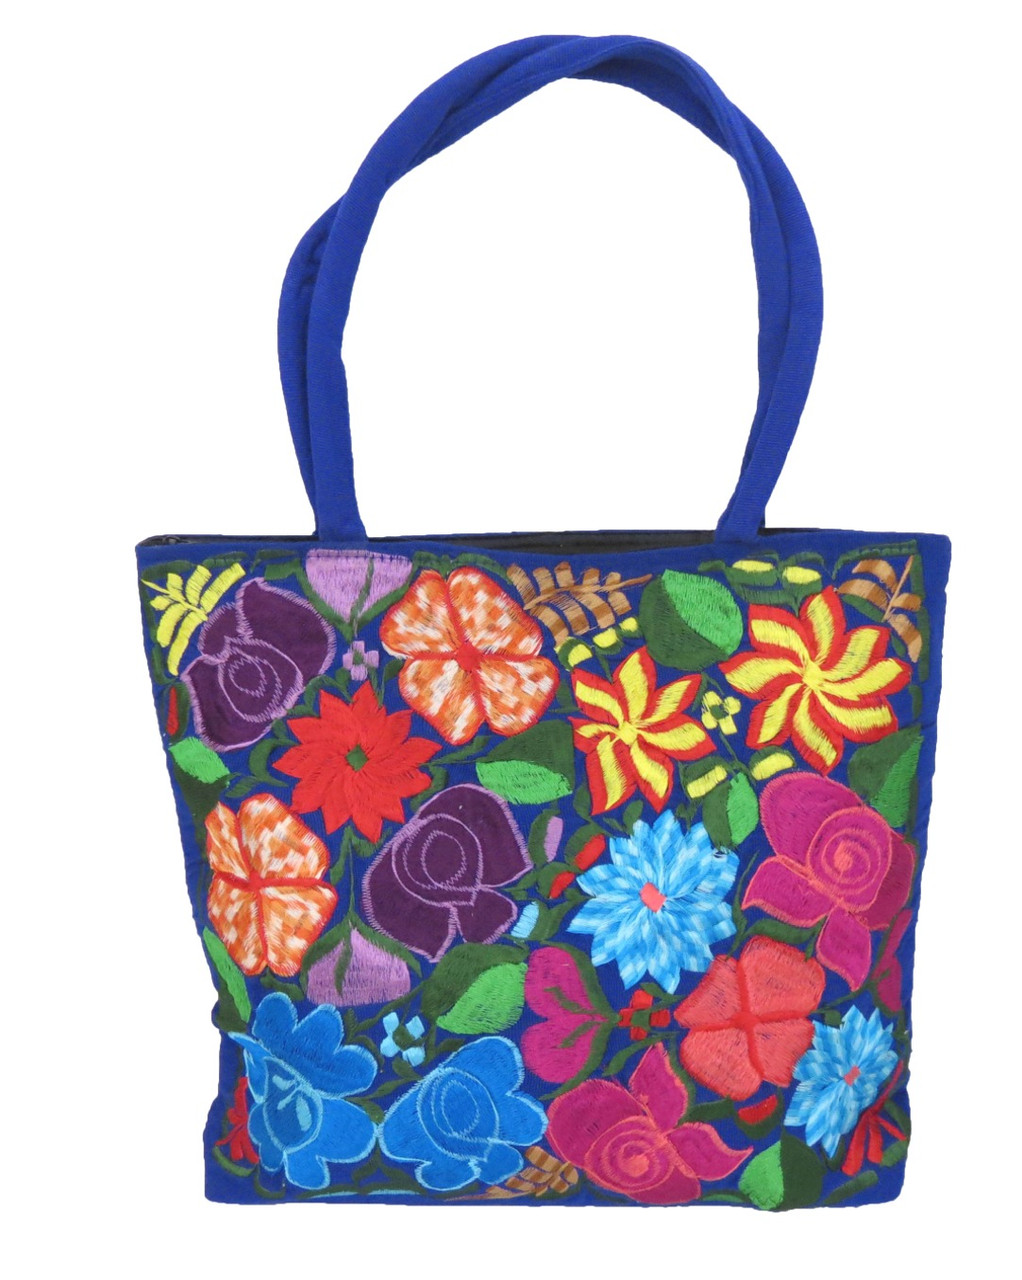 Ricardo Beverly Hills Large Floral Tote Bag Purse - Etsy